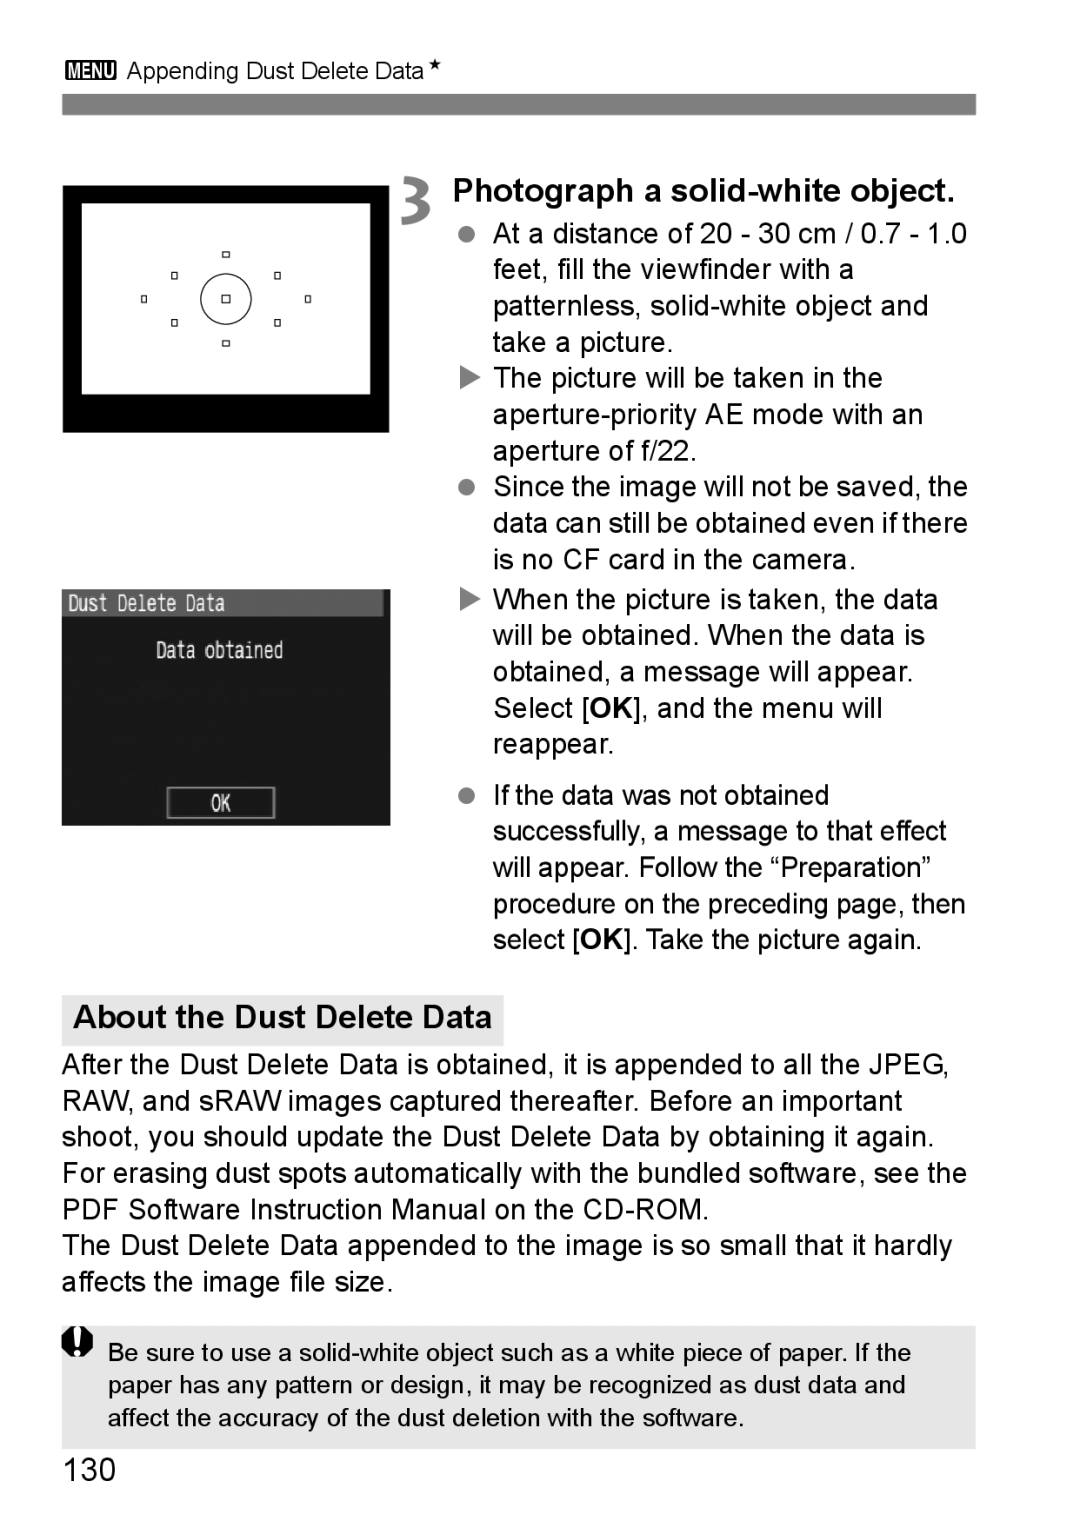 Canon EOS40D instruction manual About the Dust Delete Data, 130 